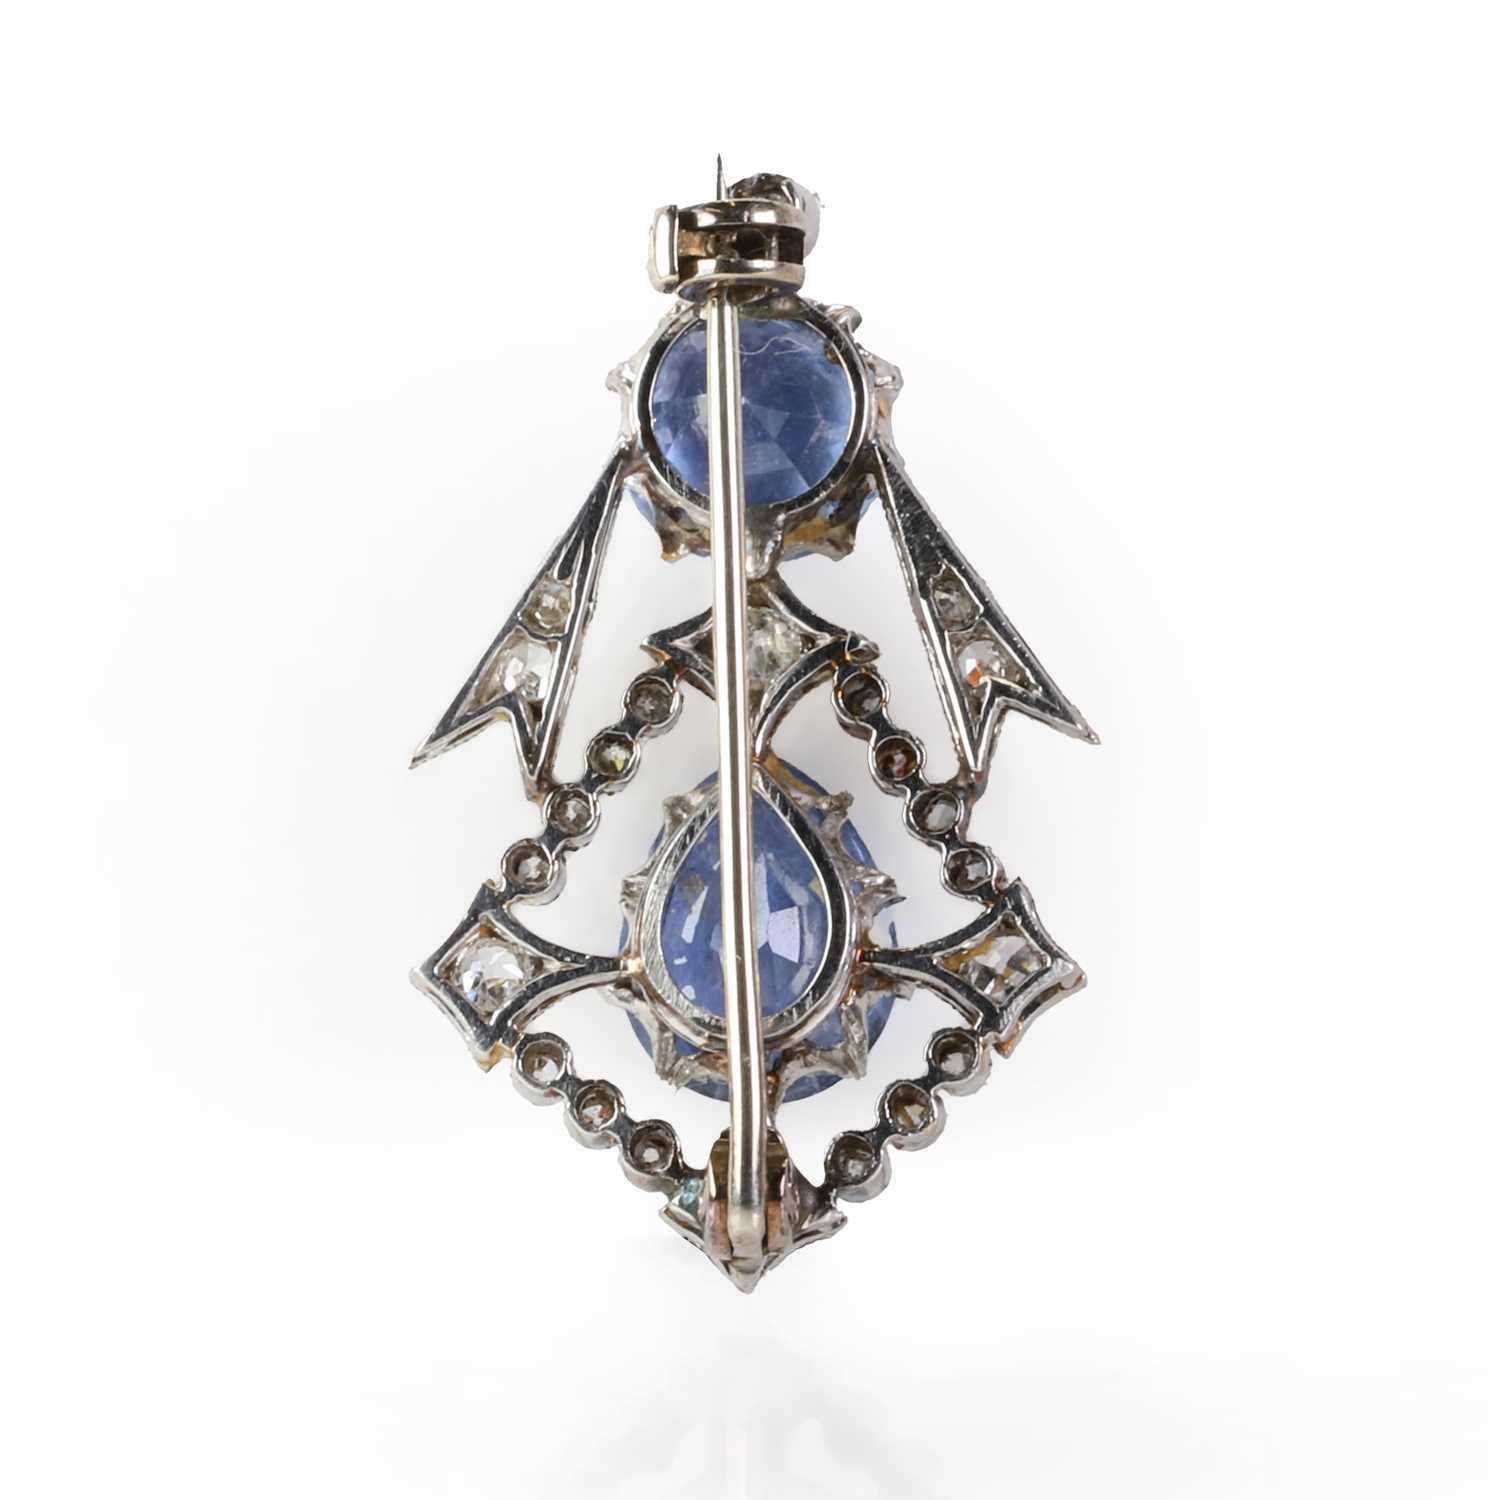 A Burmese sapphire and diamond brooch, early 20th century, - Image 2 of 2